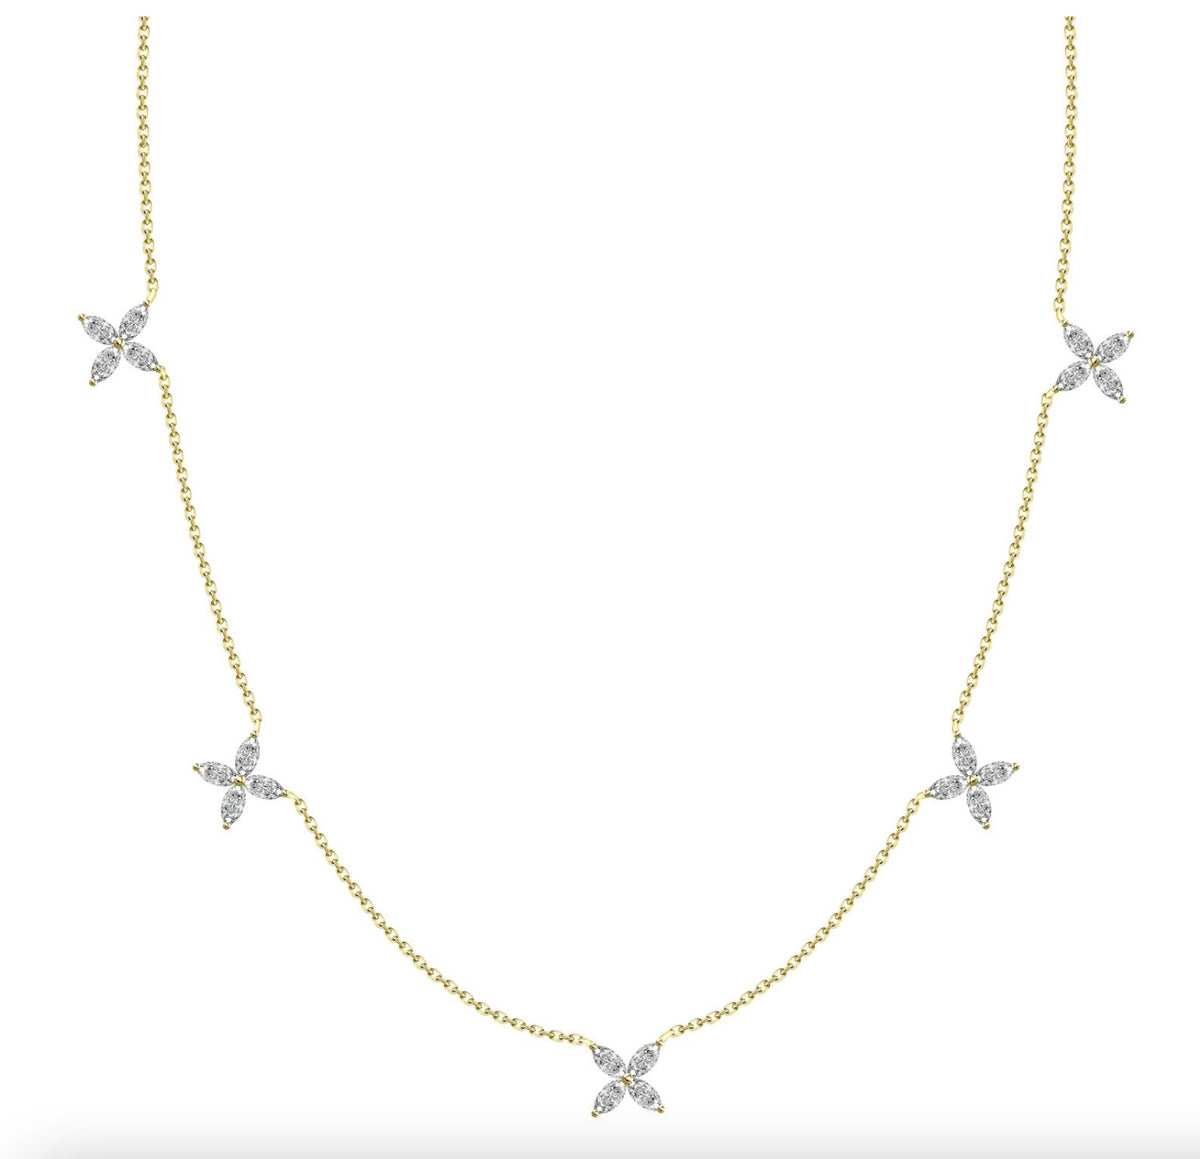 8K Necklace with 5 Diamond Clovers yellow gold